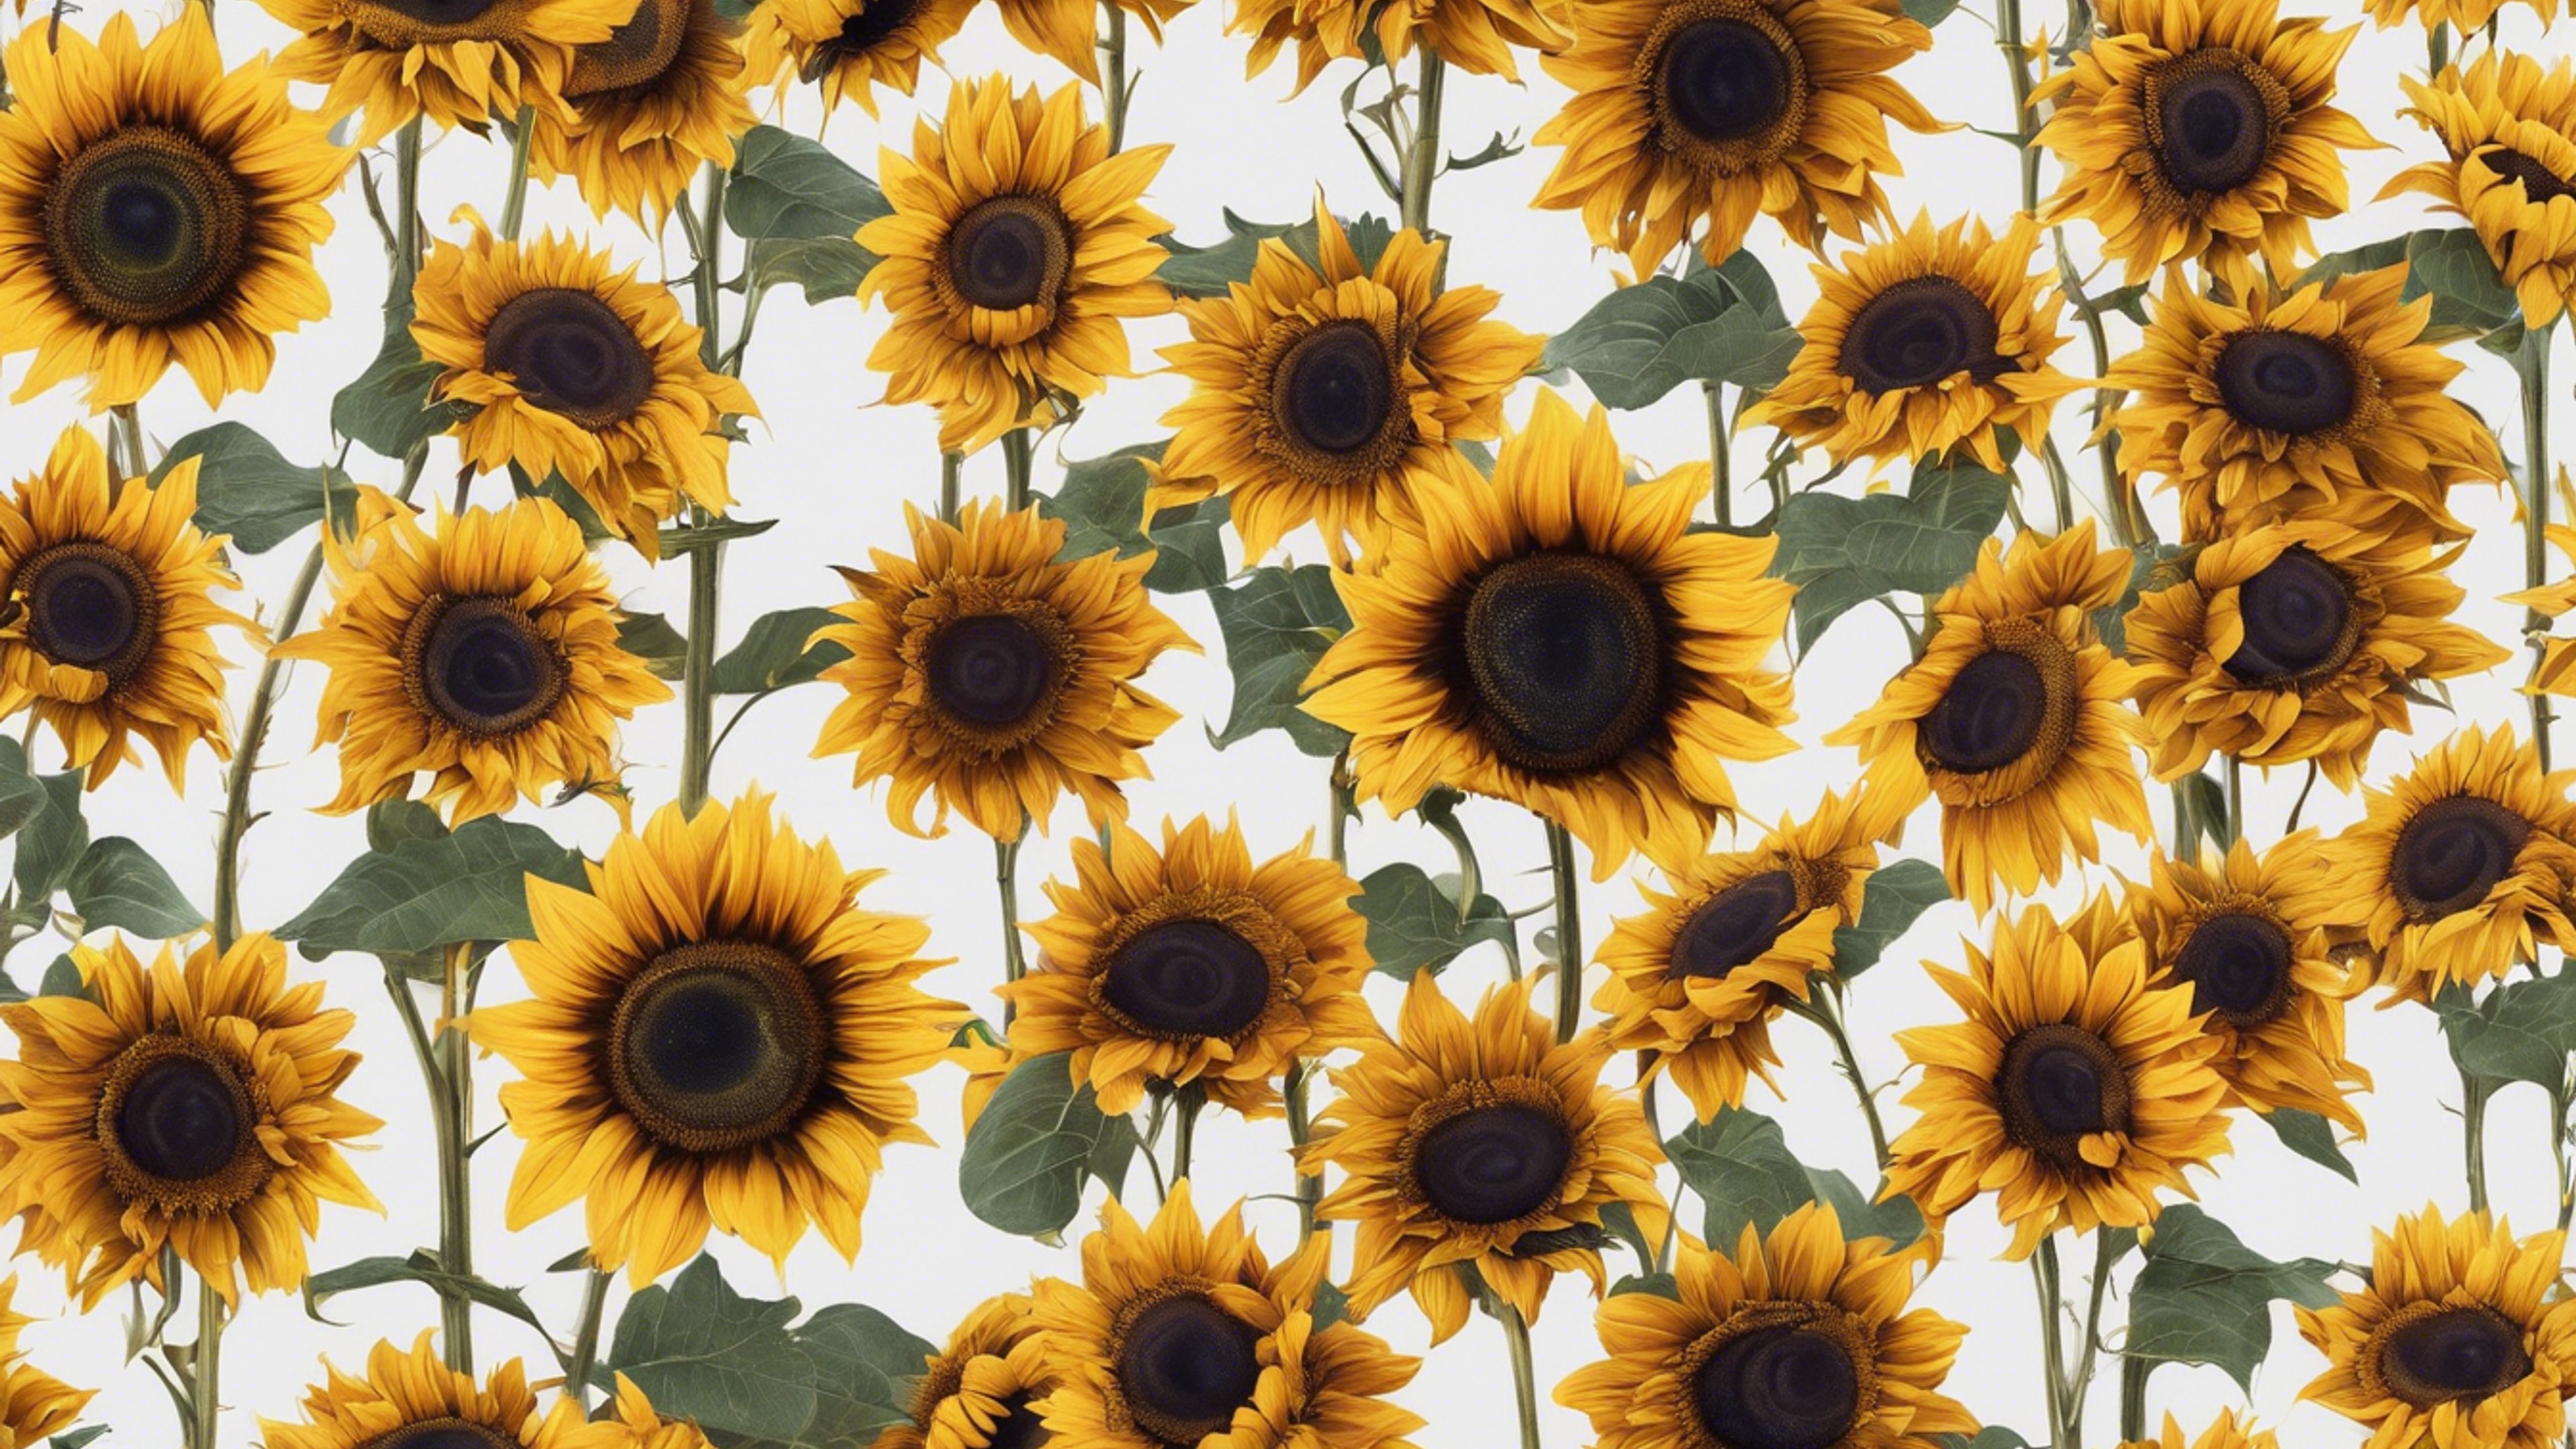 White fabric adorned with a seamless array of dark, debonair sunflowers. Tapet[27ef1d3ab63c4766bab4]